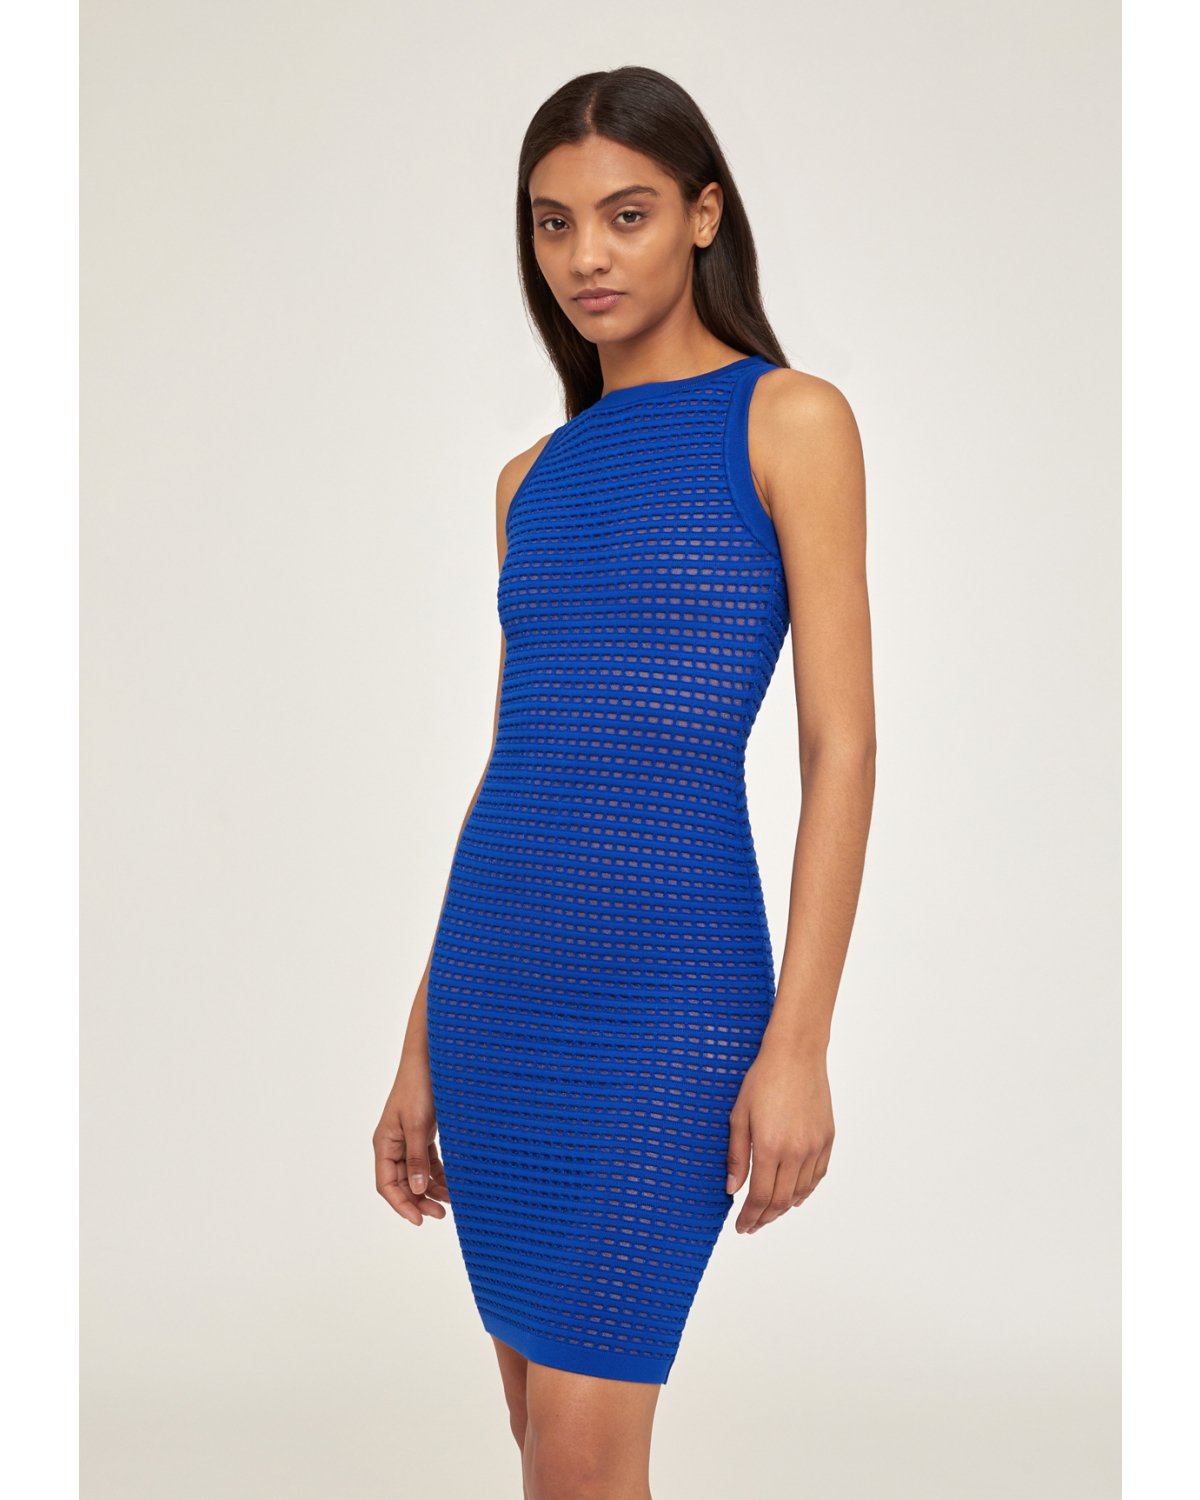 Blue jacquard iconic dress | Iconic Capsule Collection, 73_74 | Genny